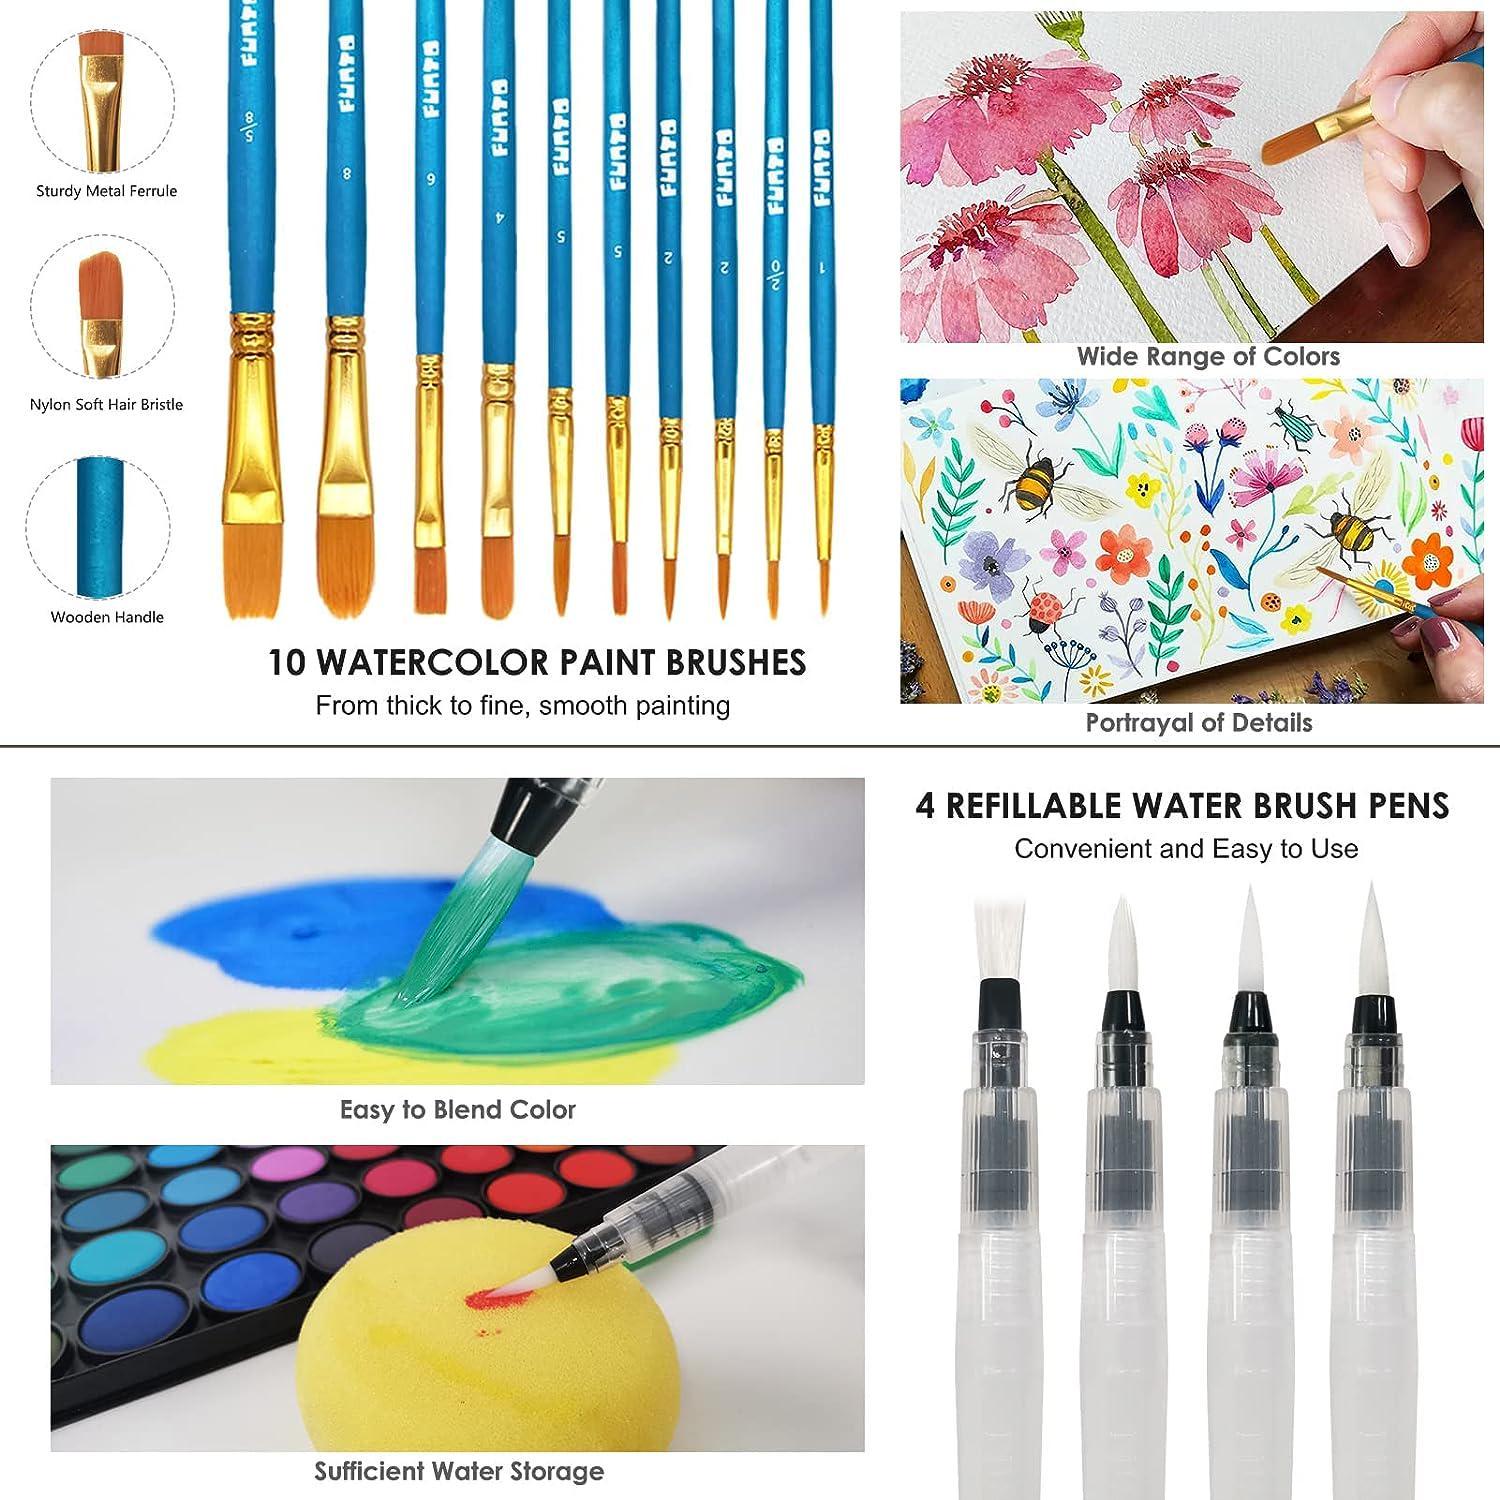 GETHPEN Watercolor Paint, 48 Colors Washable Watercolor Paint Set with a  Brush a Refillable Water Brush Pen and Palette, Non-toxic Water Color  Paints